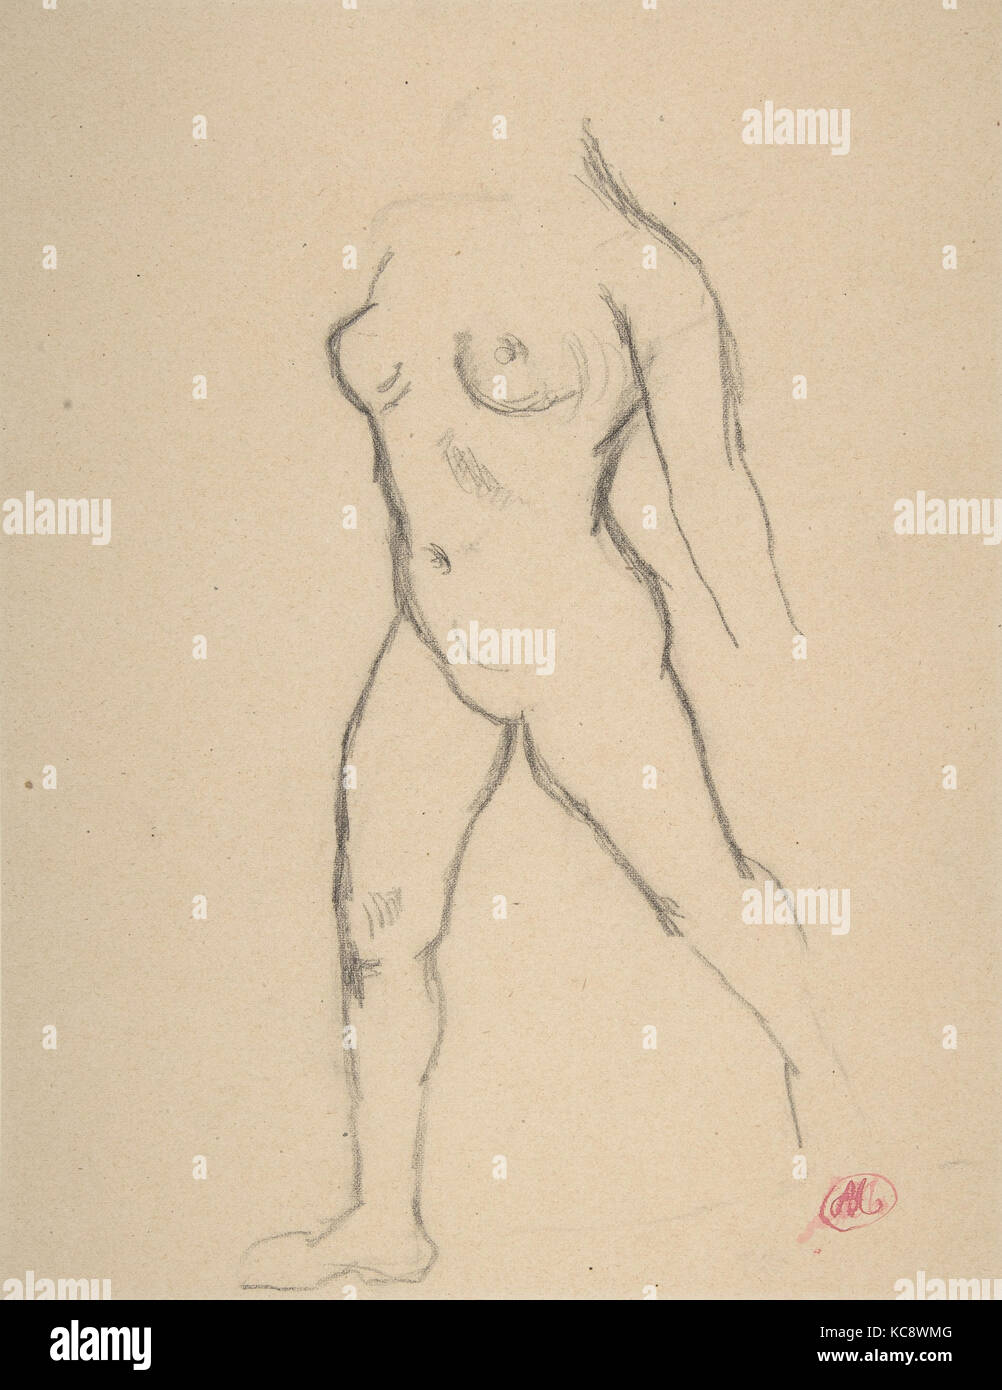 Study for 'Action in Chains (Monument to Louis-Auguste Blanqui)' or 'Île de France (Woman Walking in Water)', 1905-07, Aristide Stock Photo